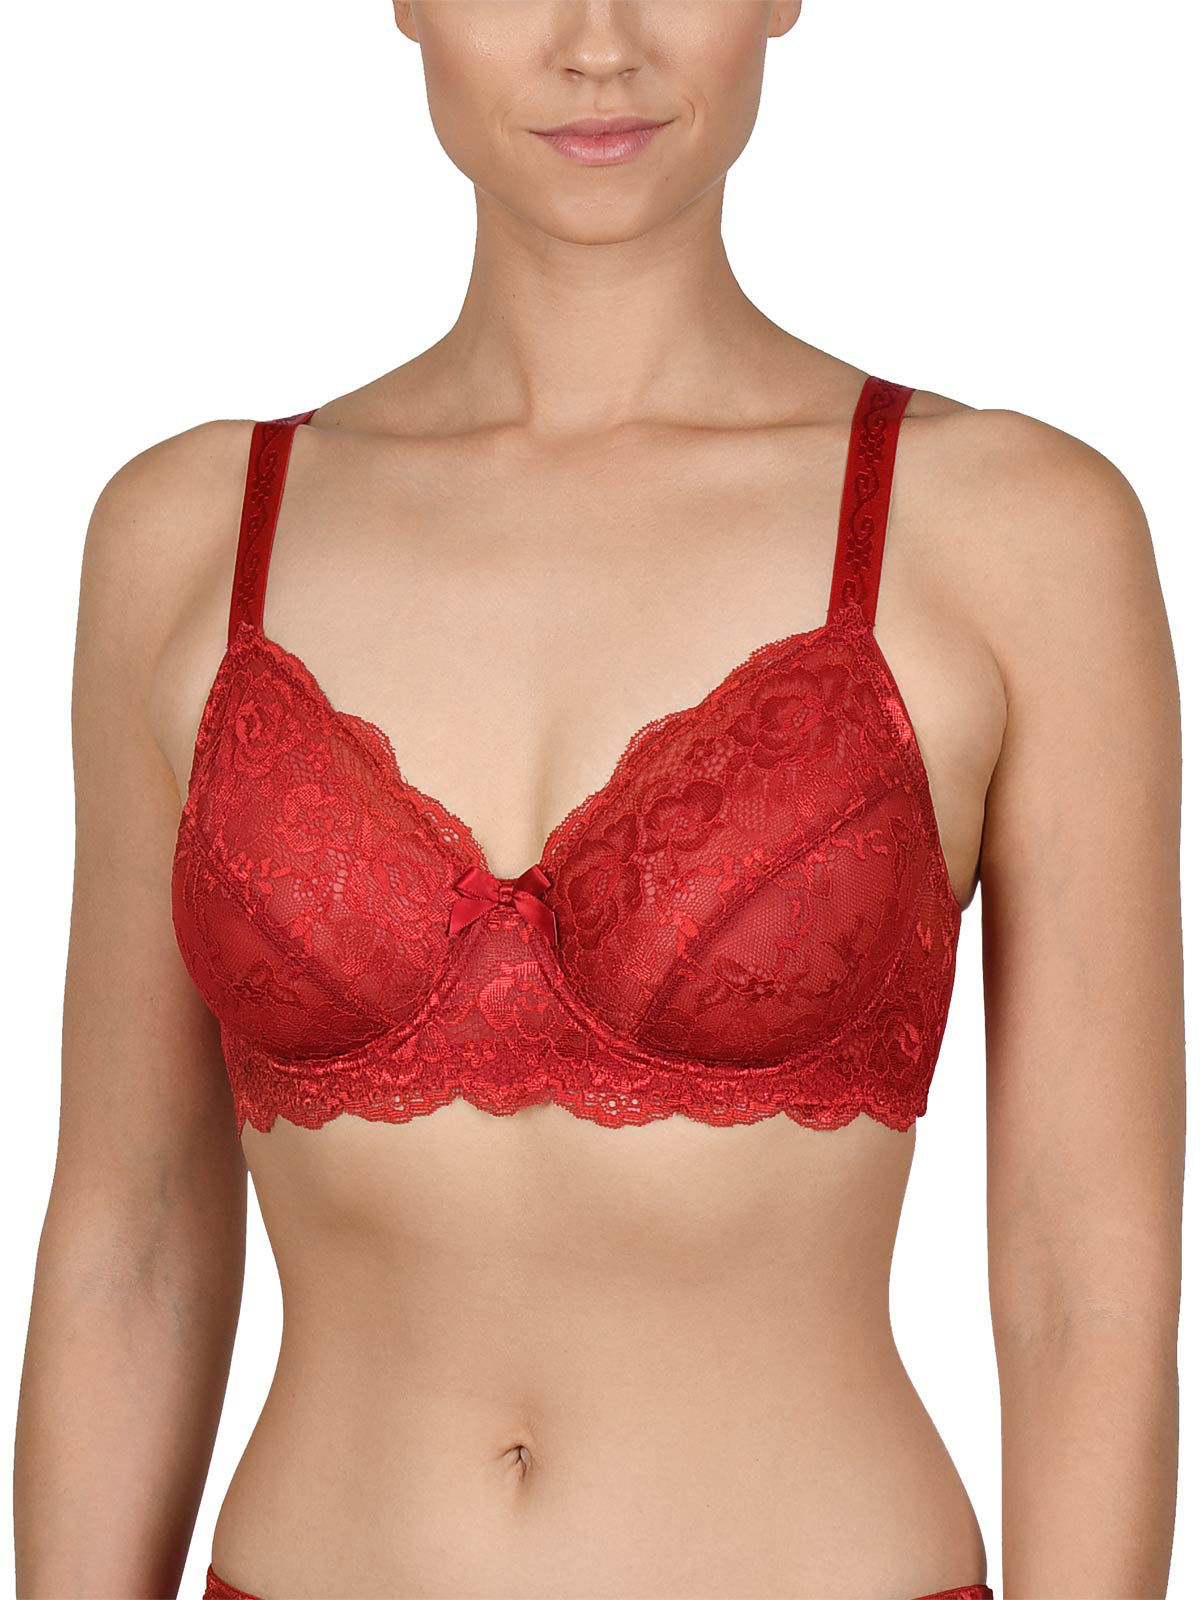 Naturana - - Naturana, Cybele ASSORTED Soft Cup Bras - Size 34 to